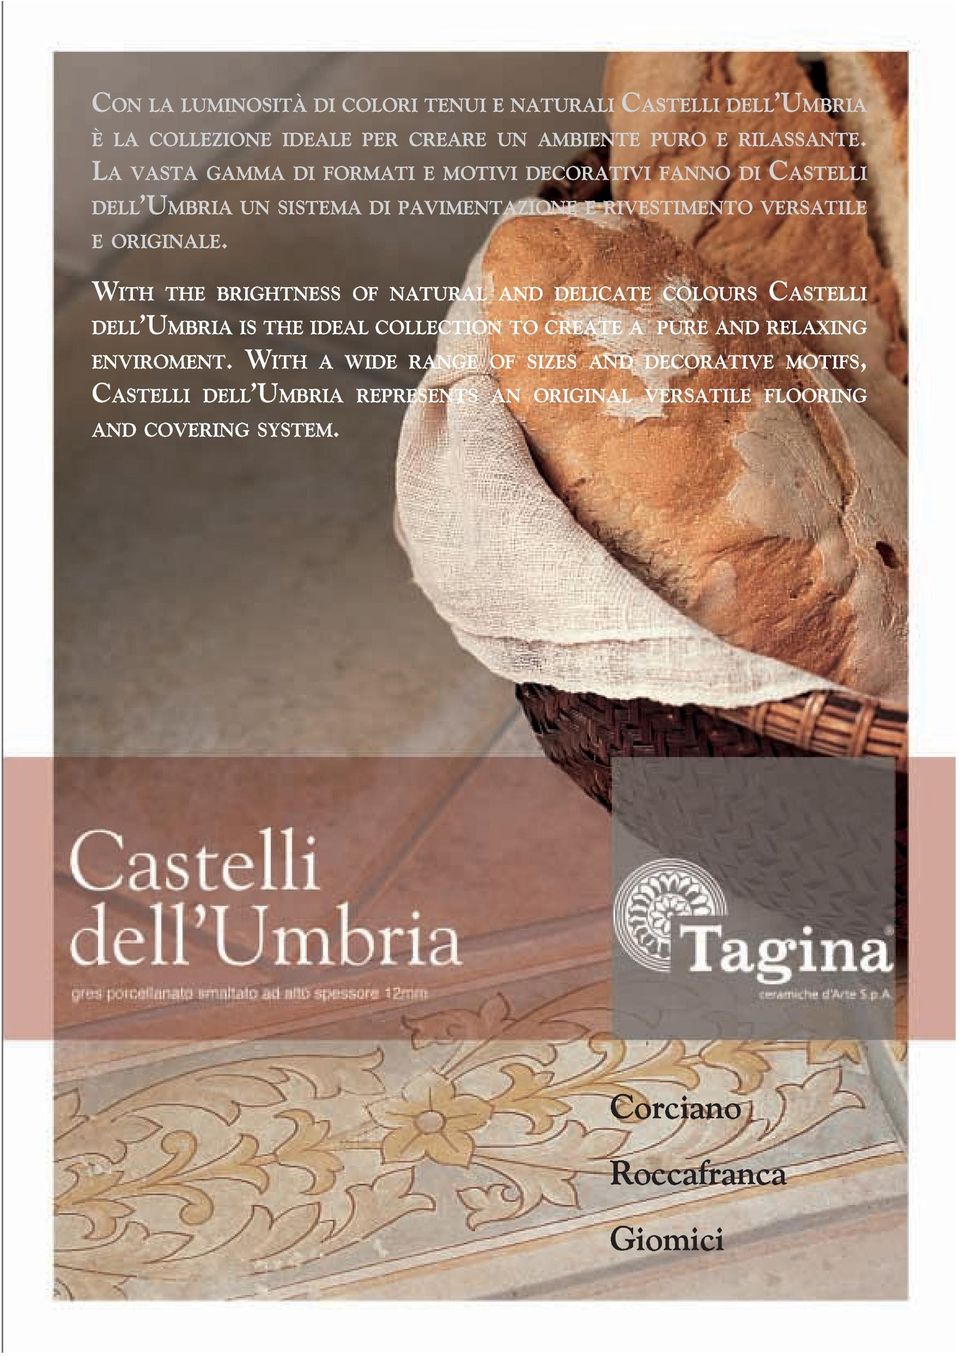 WITH THE BRIGHTNESS OF NATURAL AND DELICATE COLOURS CASTELLI DELLÕUMBRIA IS THE IDEAL COLLECTION TO CREATE A PURE AND RELAXING ENVIROMENT.